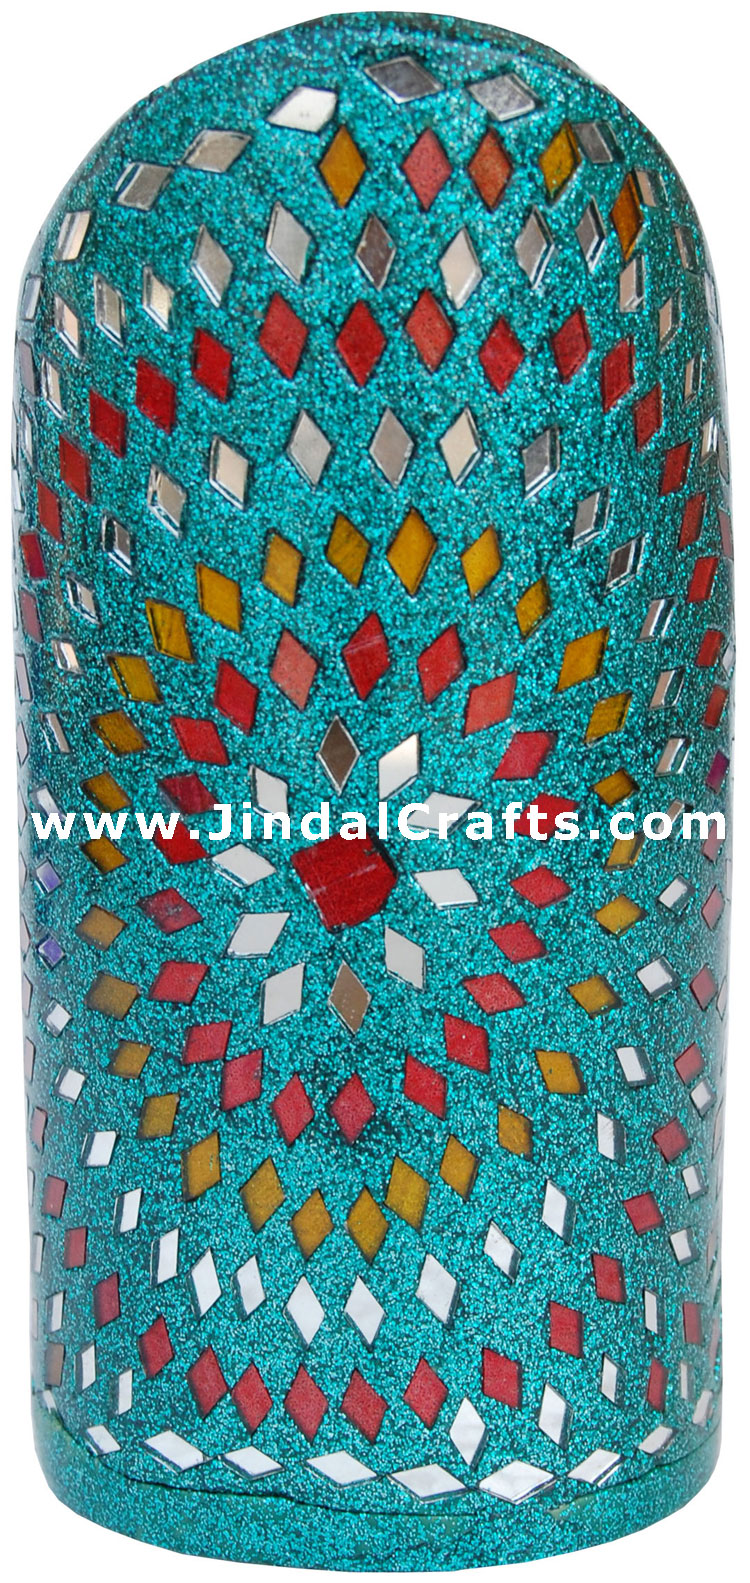 Handmade Decorative Lac Pen Stand Holder from Indian Lac Mirror Arts Handicrafts